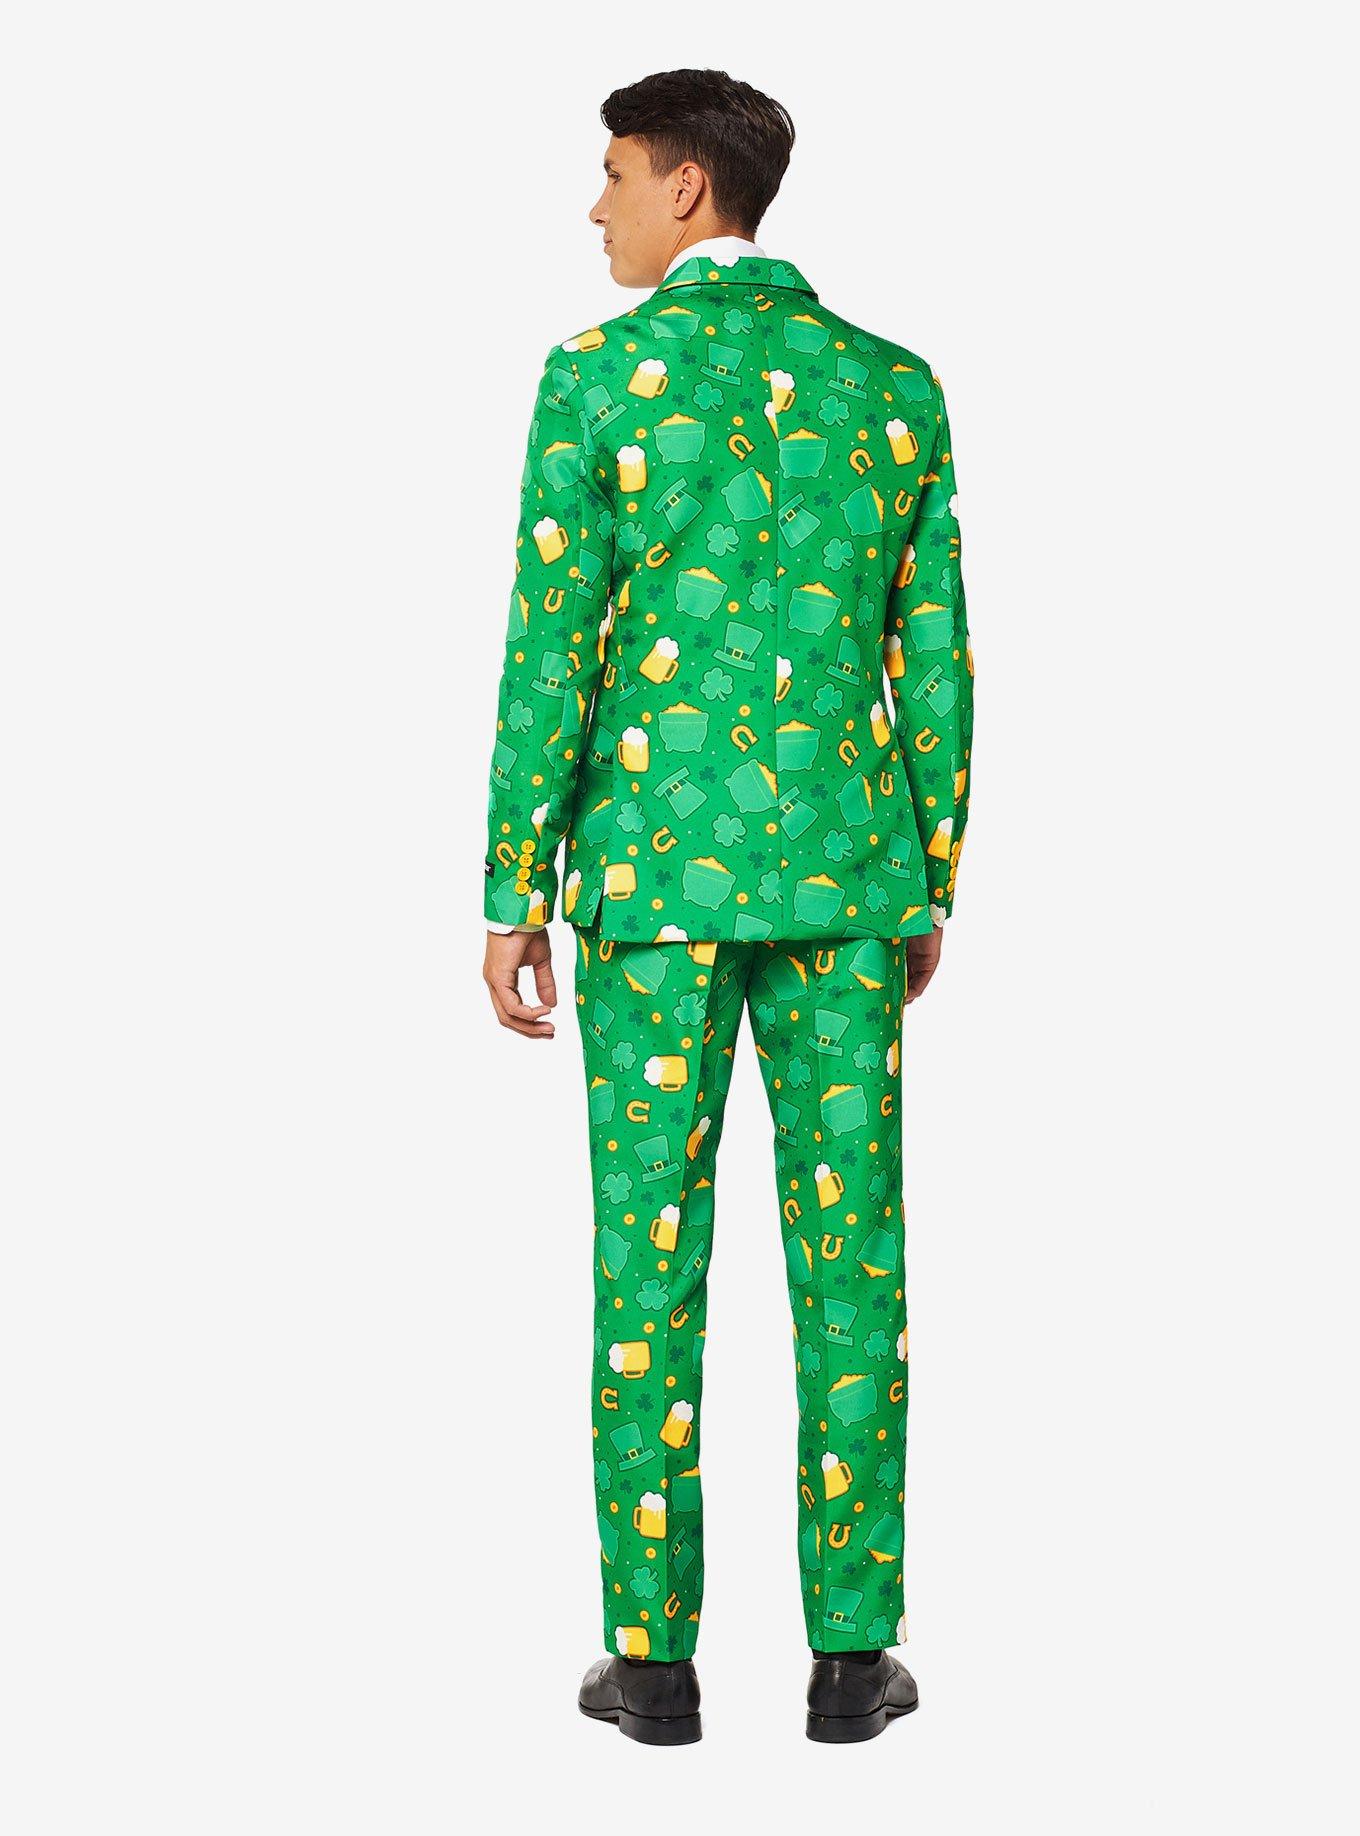 Suitmeister Men's St. Patrick's Day Suit, GREEN  YELLOW, alternate